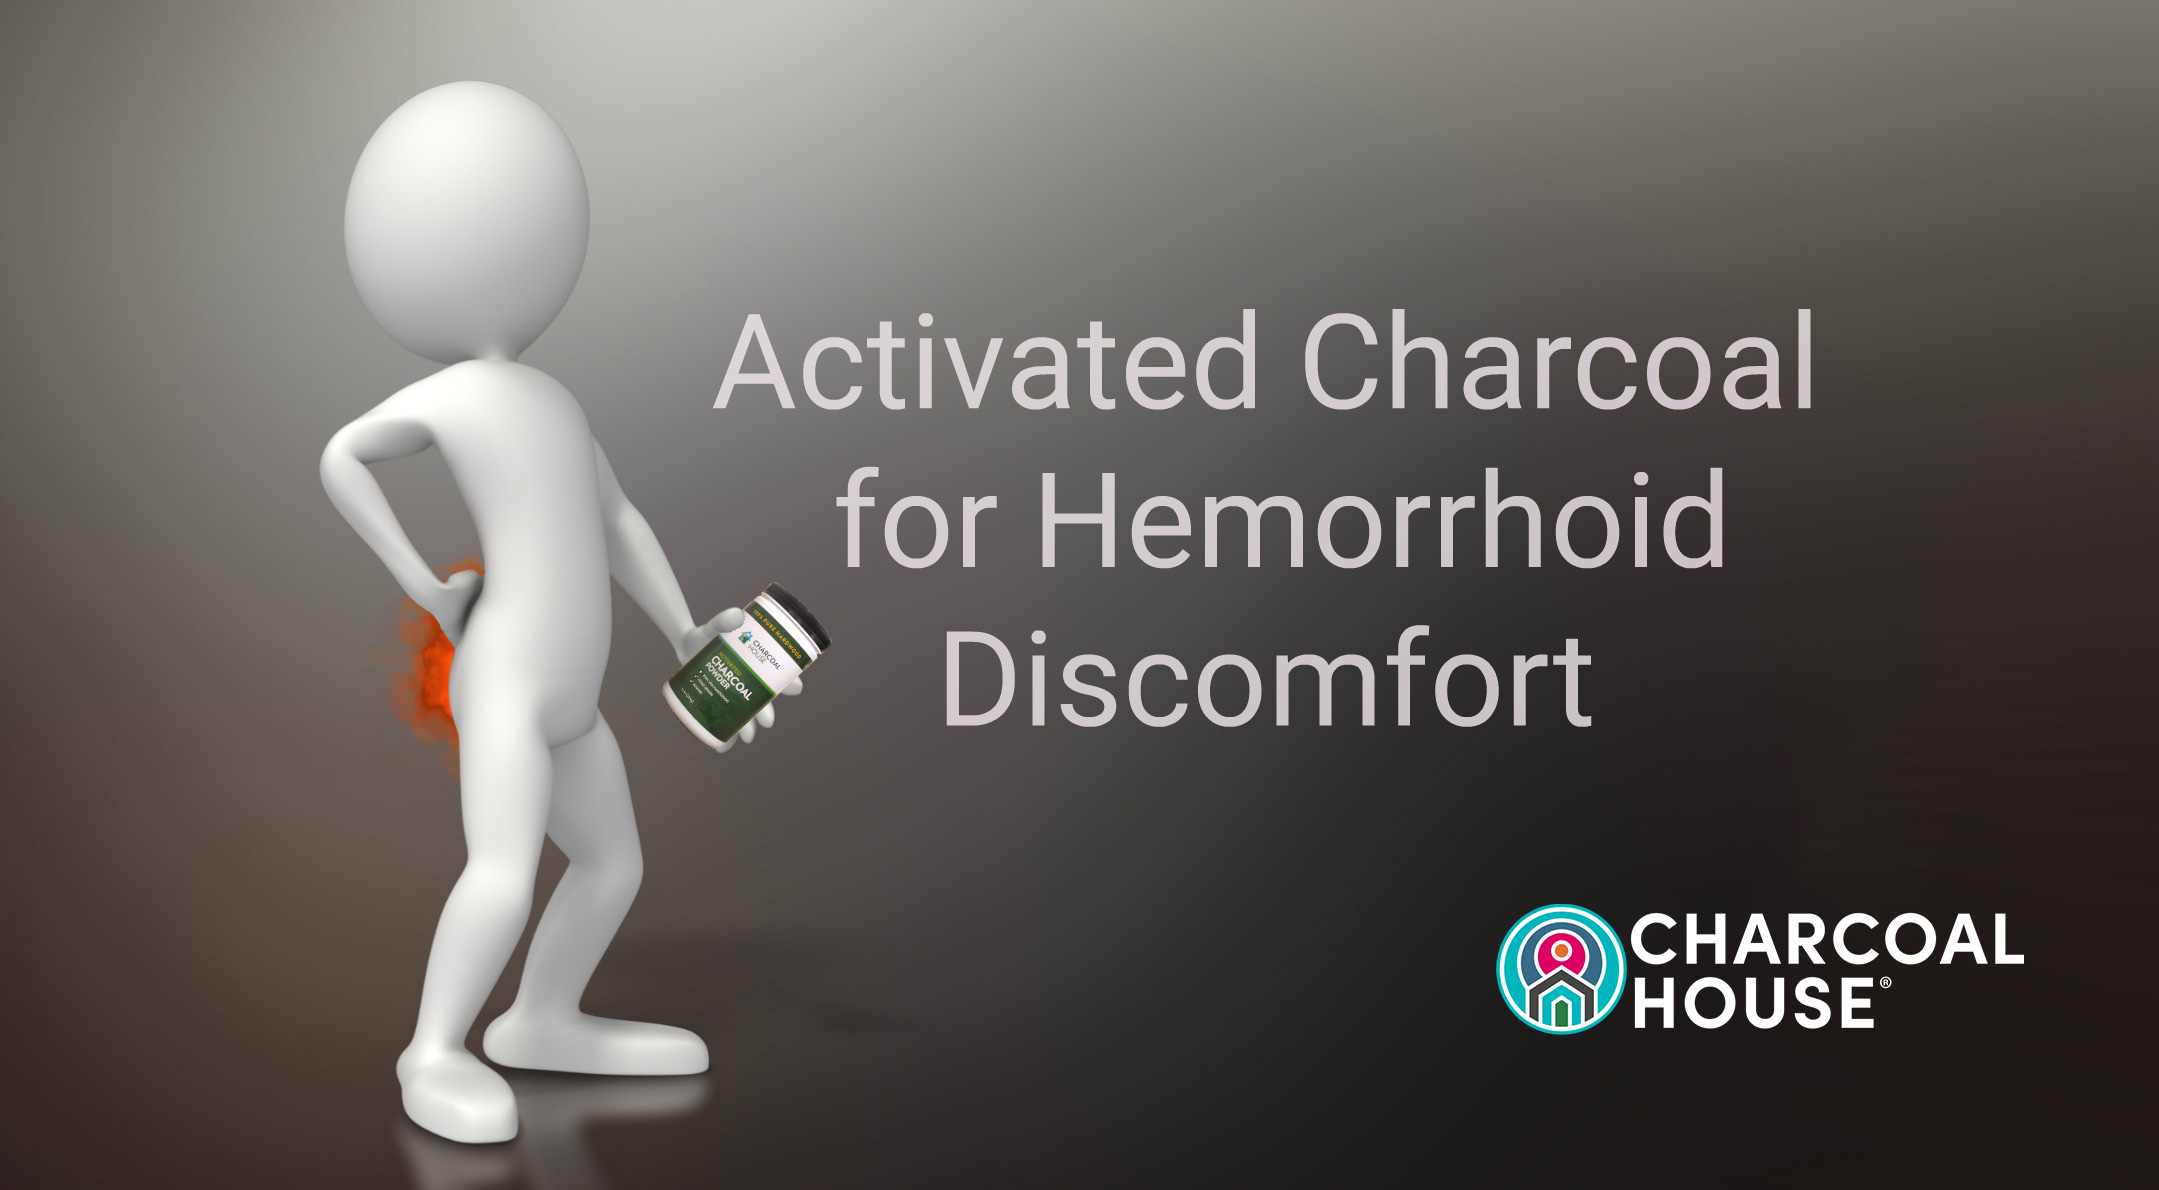 ACTIVATED CHARCOAL FOR HEMORRHOID DISCOMFORT